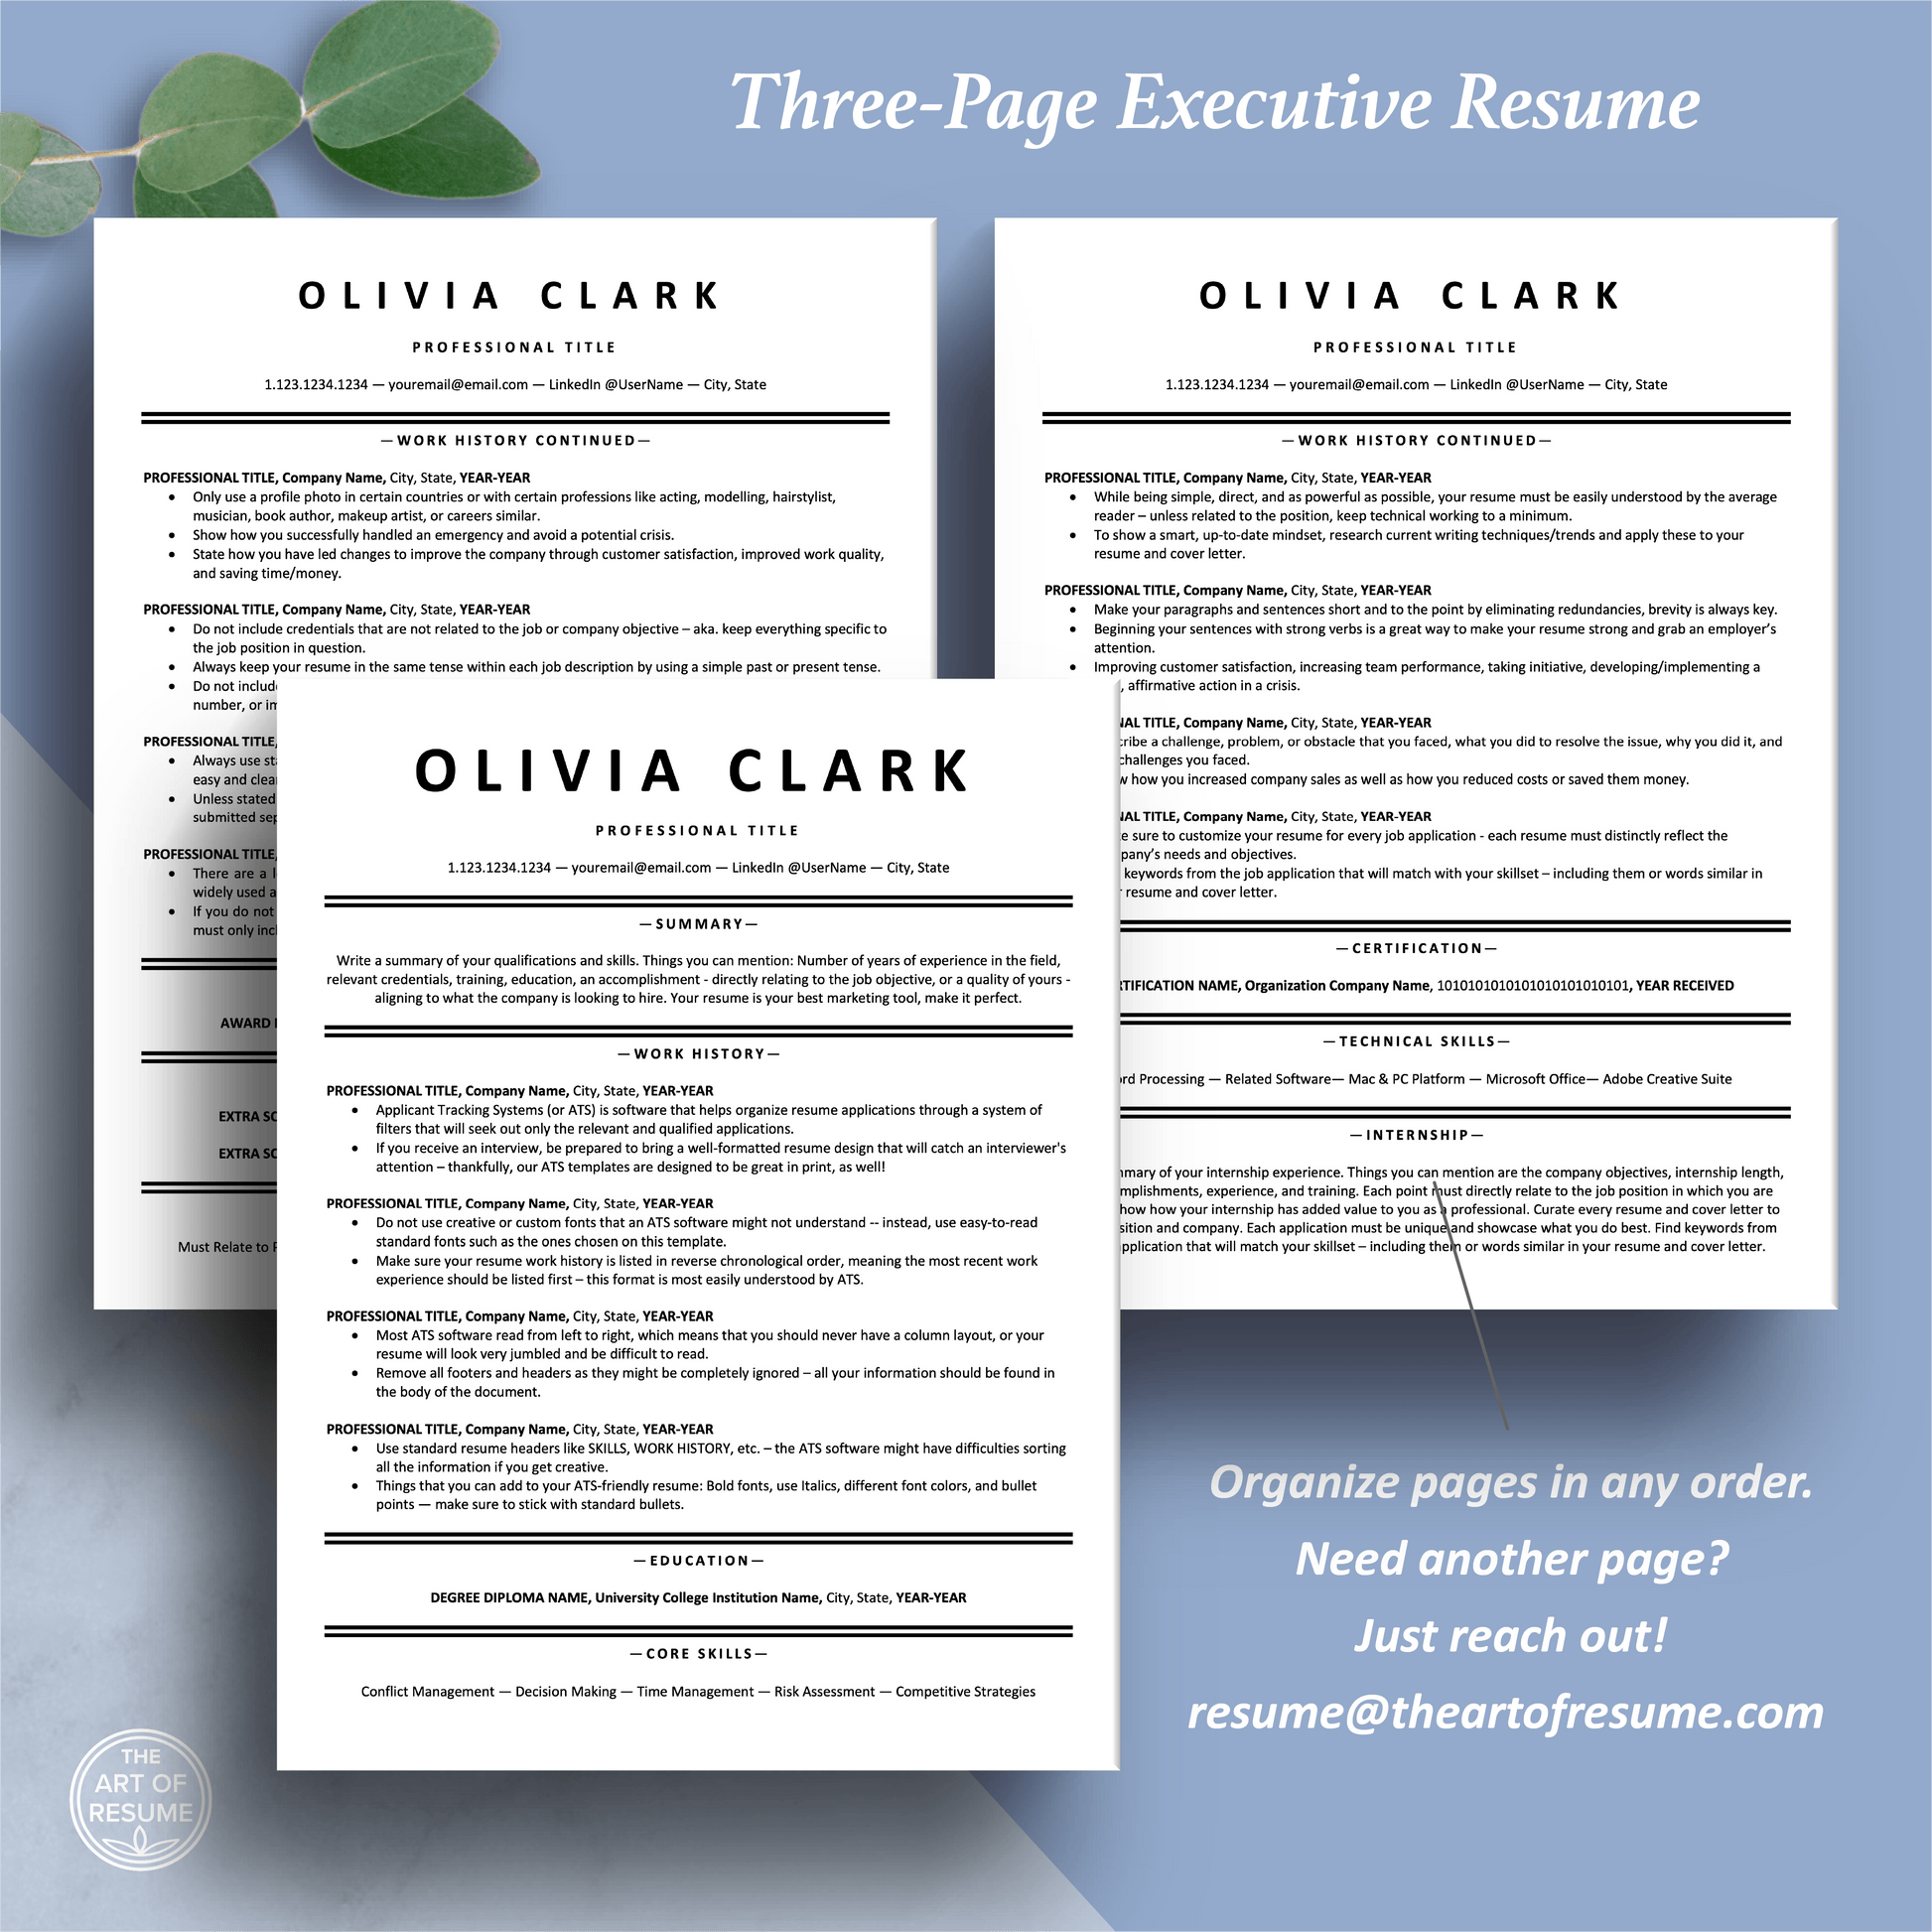 ATS Friendly Resume Template Bundle | Google Docs, Microsoft Word, Apple Pages - The Art of Resume